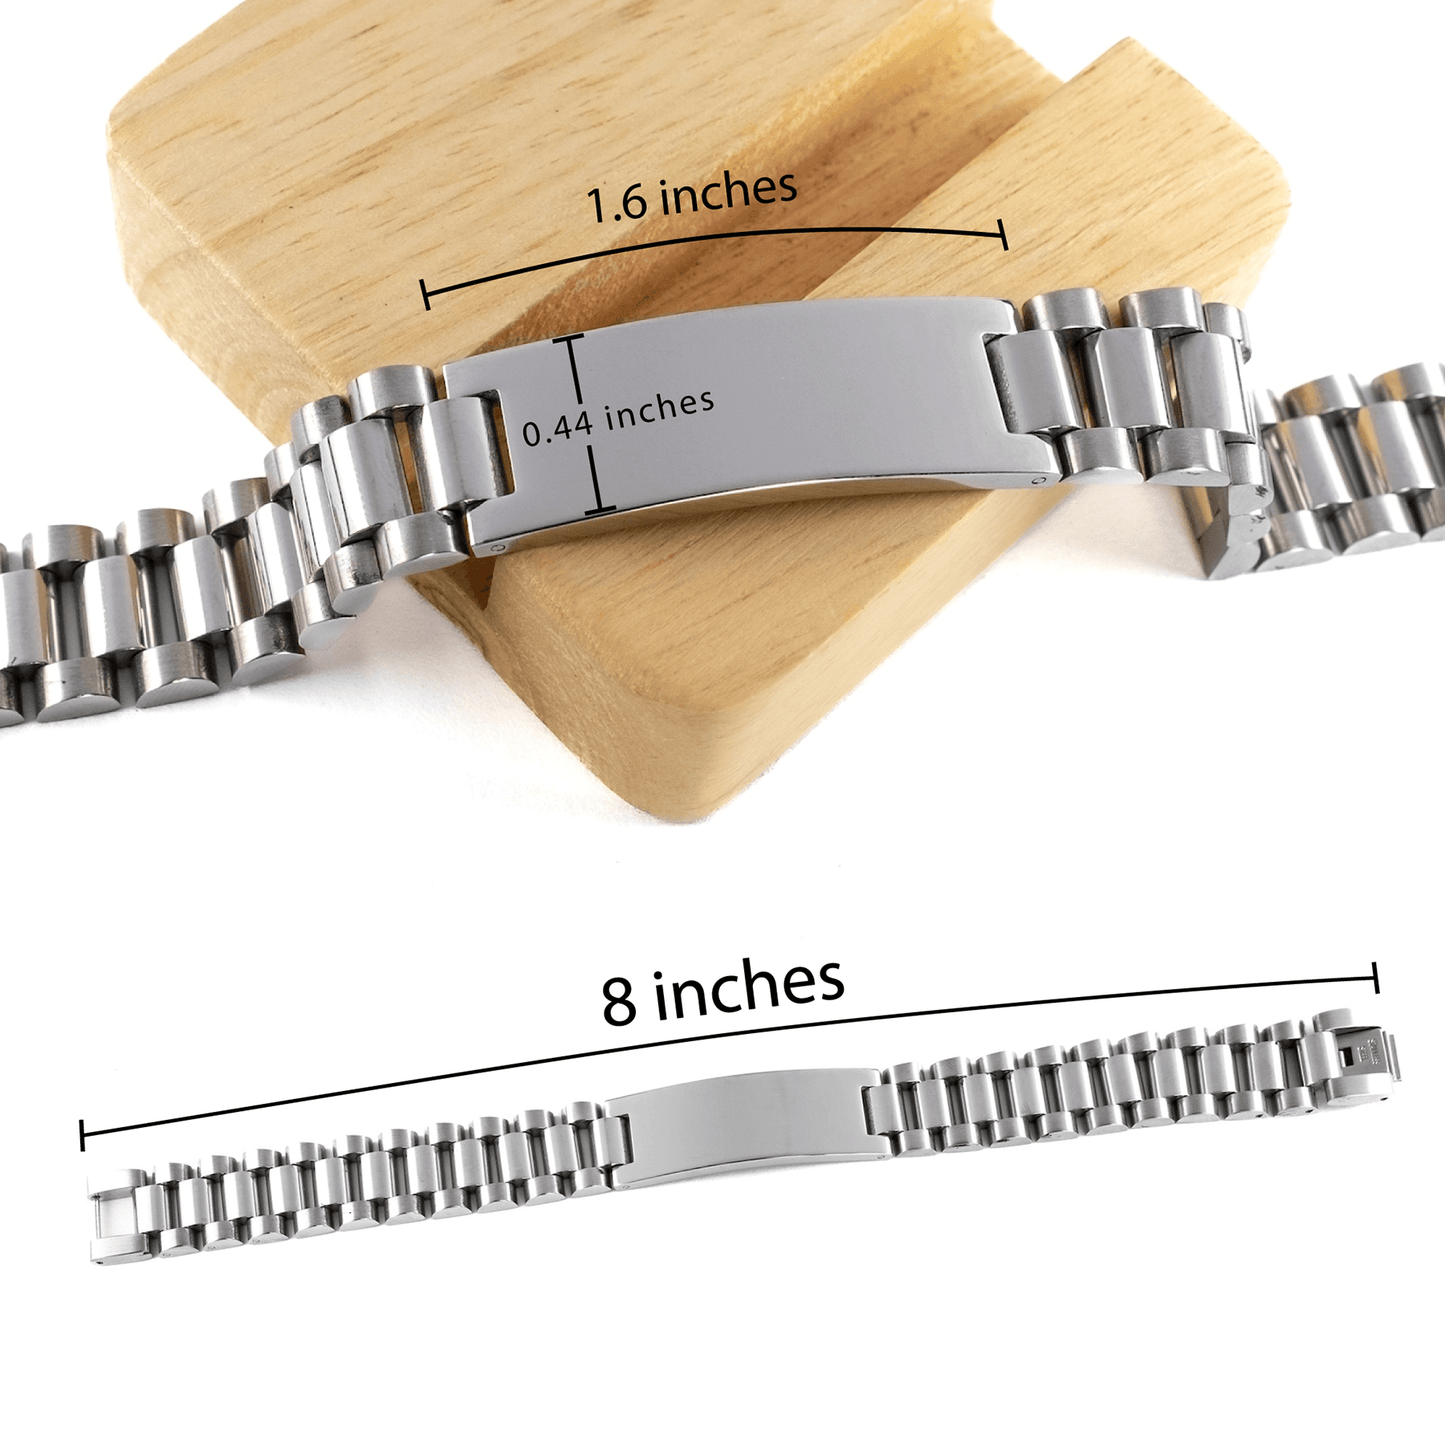 Court Reporter Ladder Stainless Steel Engraved Bracelet - Thanks for being who you are - Birthday Christmas Jewelry Gifts Coworkers Colleague Boss - Mallard Moon Gift Shop